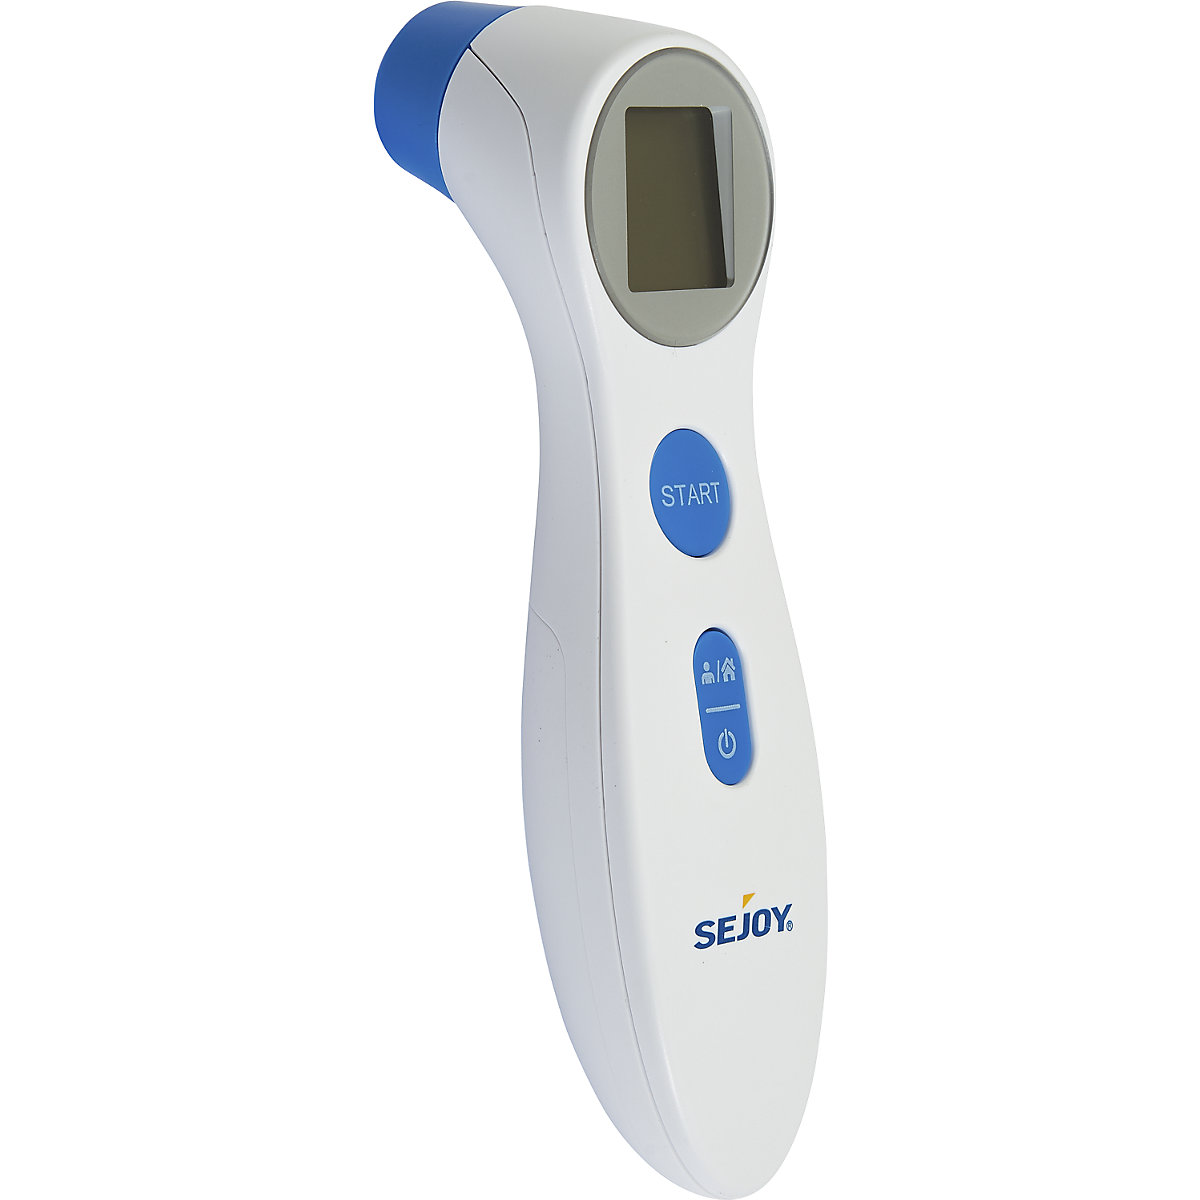 Infrared fever thermometer